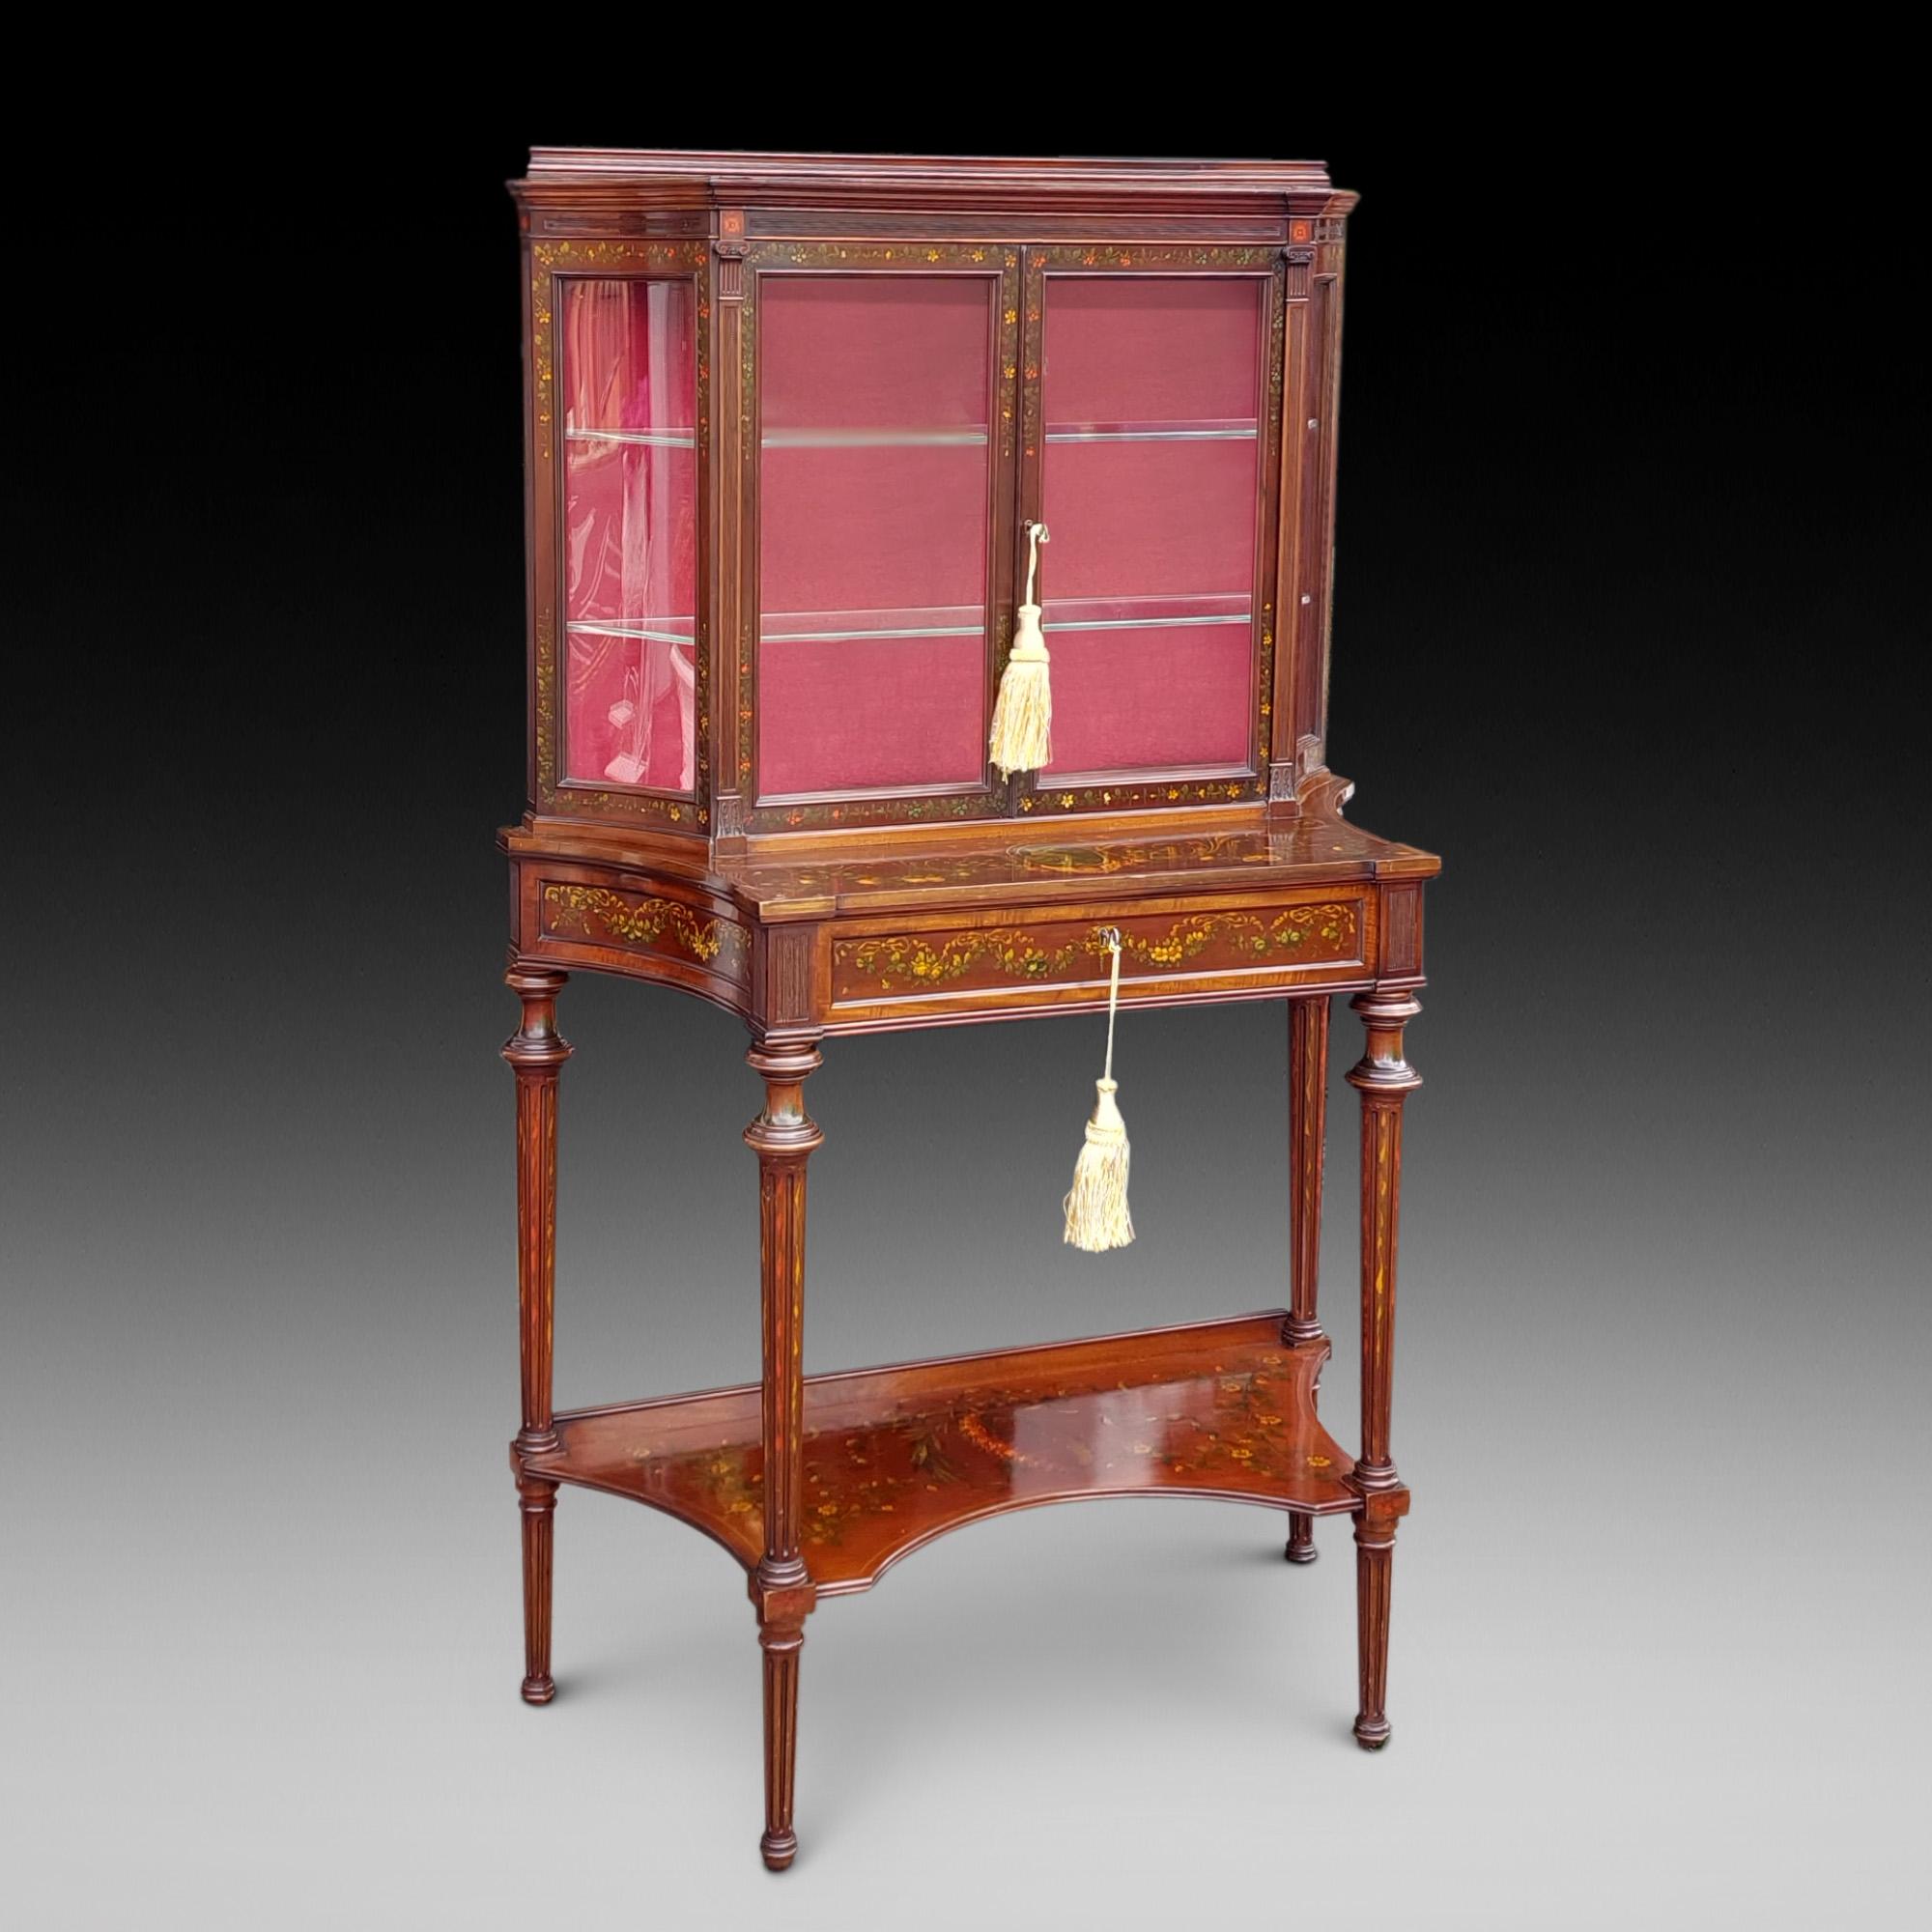 Edwards and Roberts Edwardian Painted Mahogany Glazed Display Cabinet with concave glass side panels and sides, single drawer and undershelf, raised on reeded tapering feet 36